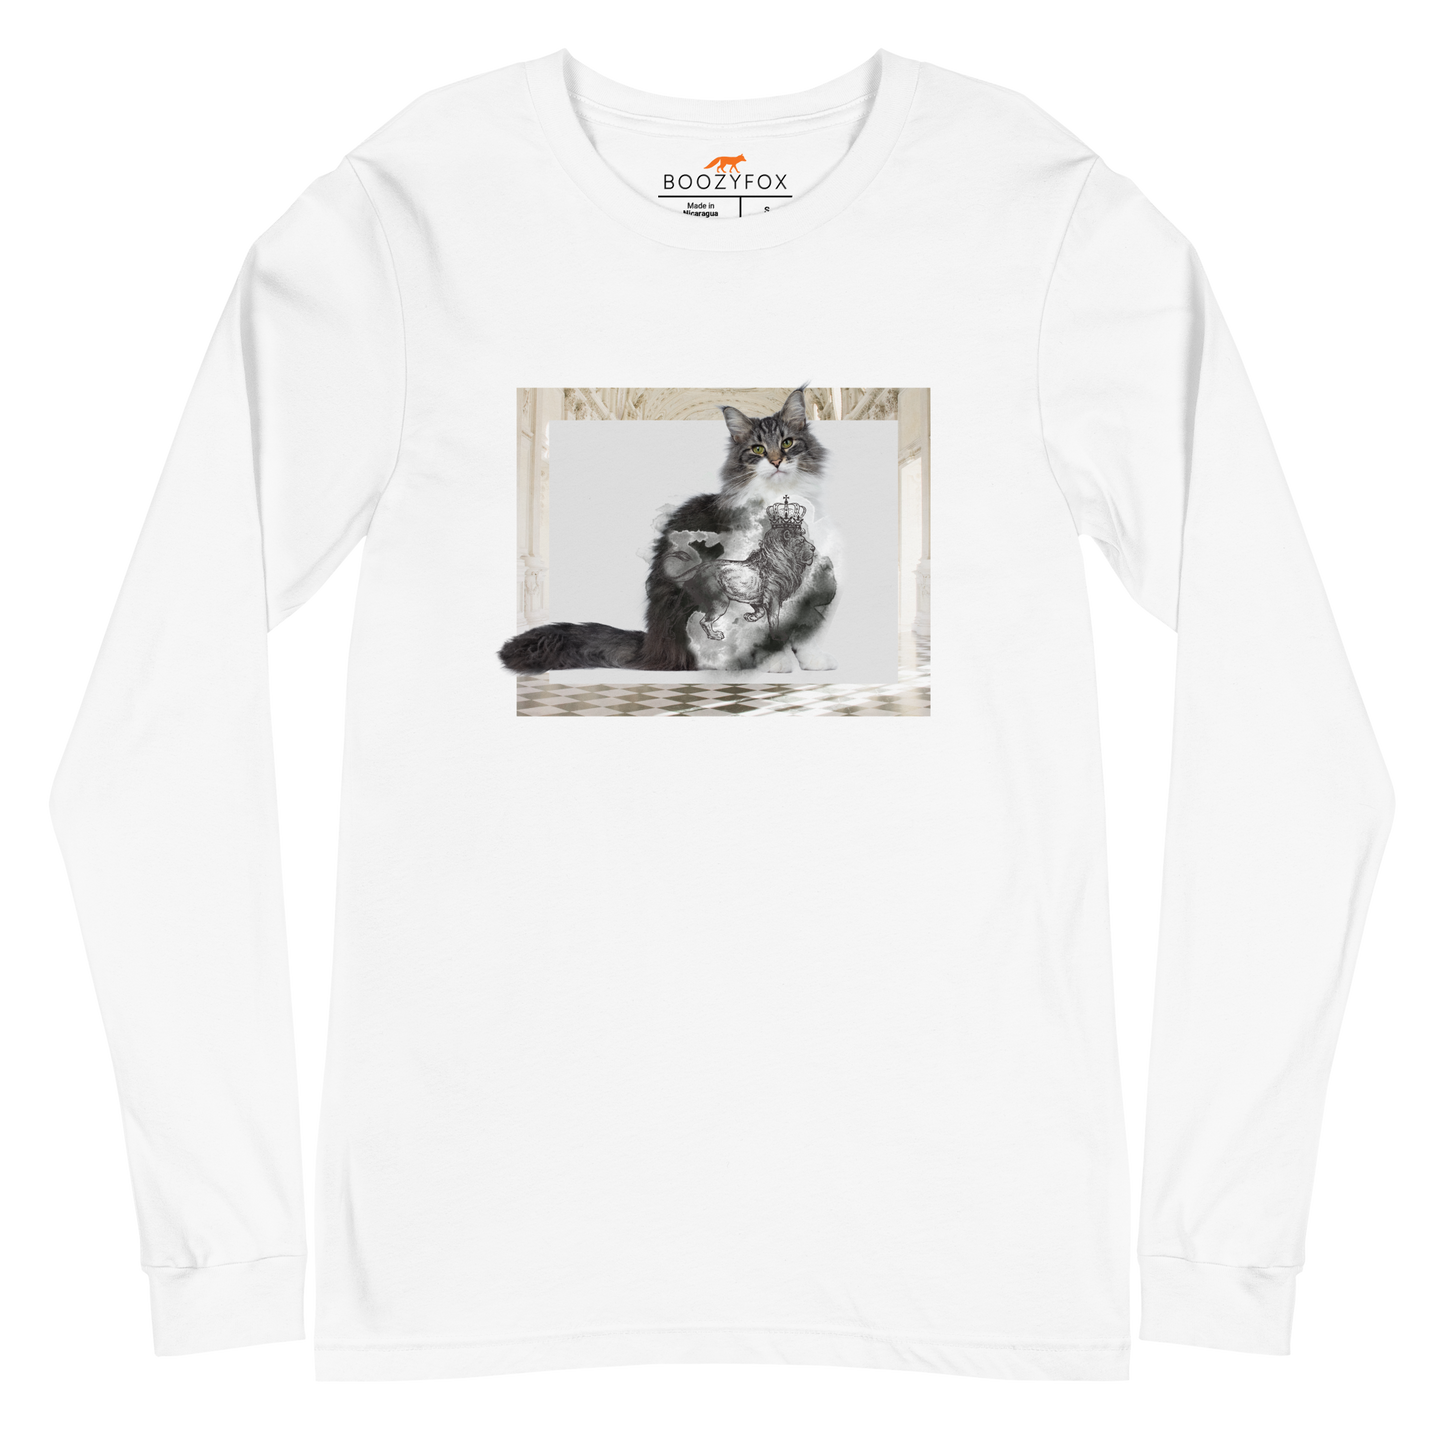 White Royal Cat Long Sleeve Tee featuring a Majestic Cat graphic on the chest - Cute Cat Long Sleeve Graphic Tees - Boozy Fox